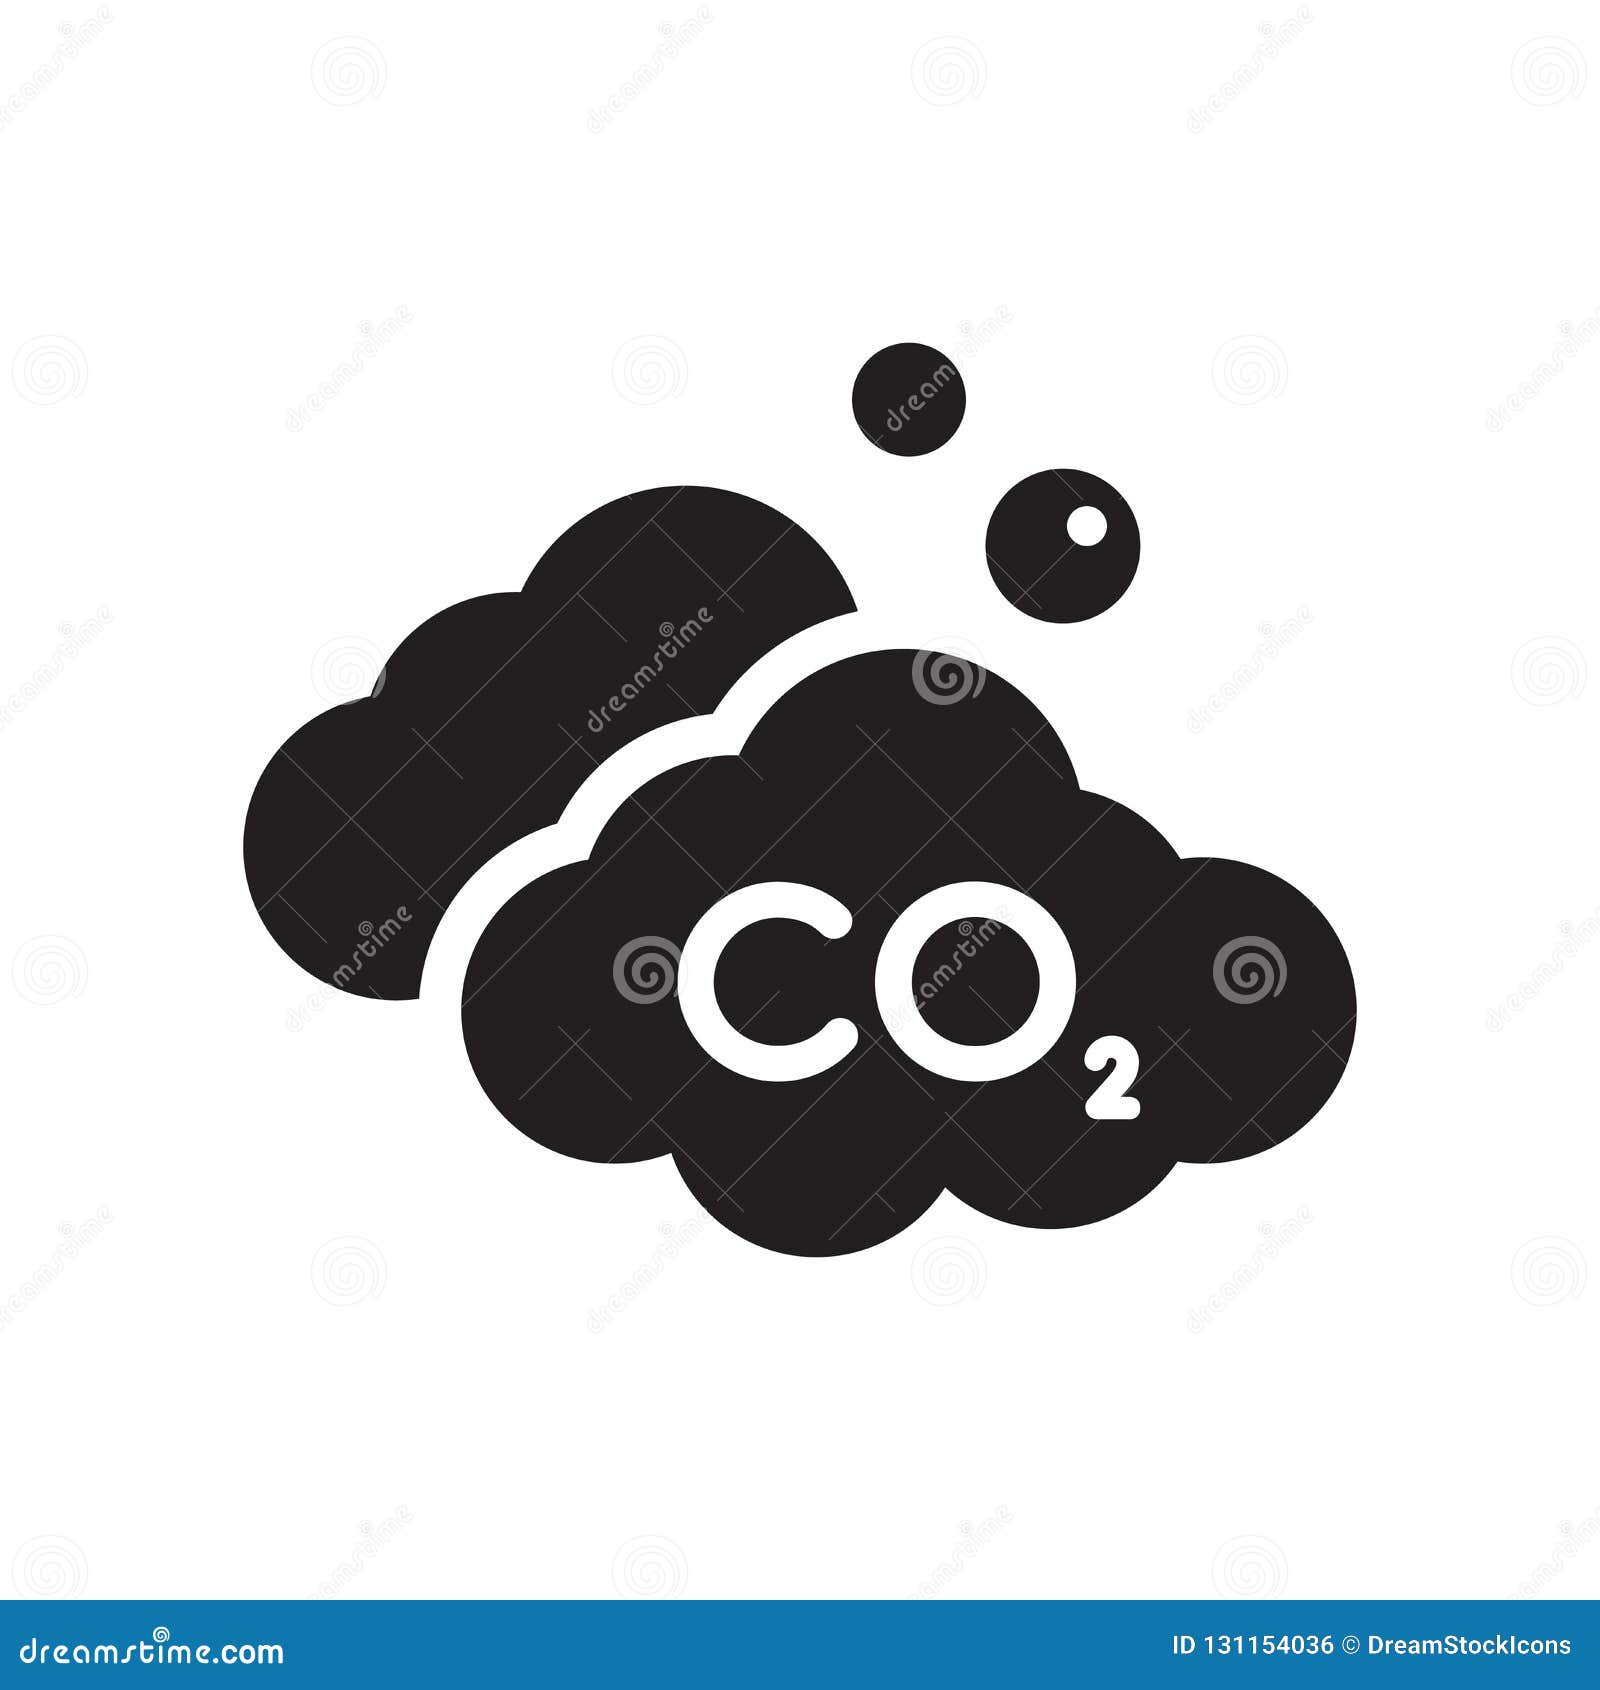 co2 icon. trendy co2 logo concept on white background from indus